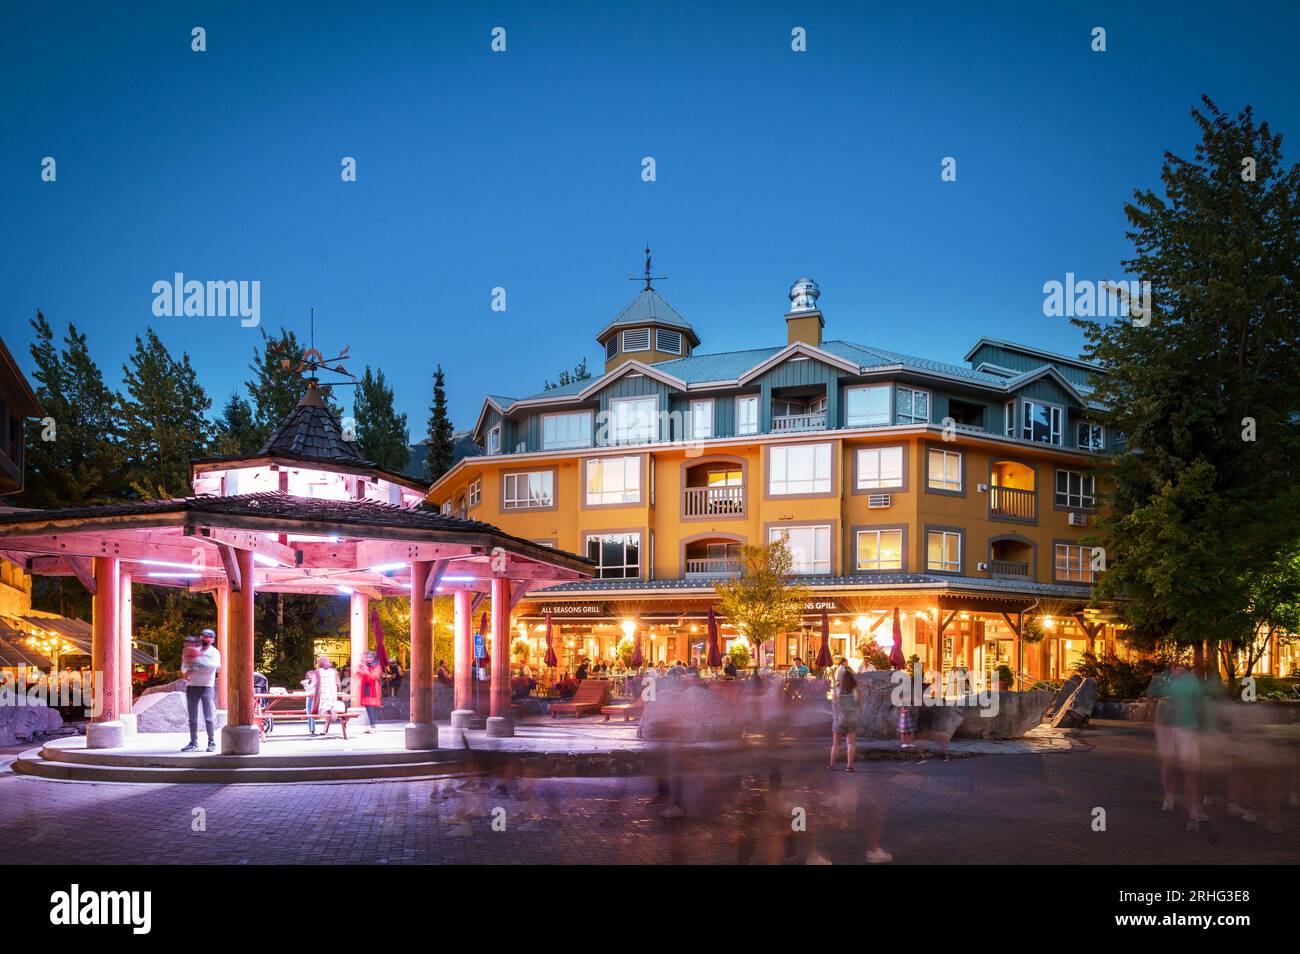 Tourists dine outside on a summer evening on restaurant patios in the Whistler Village.  Whistler BC, Canada. Stock Photo